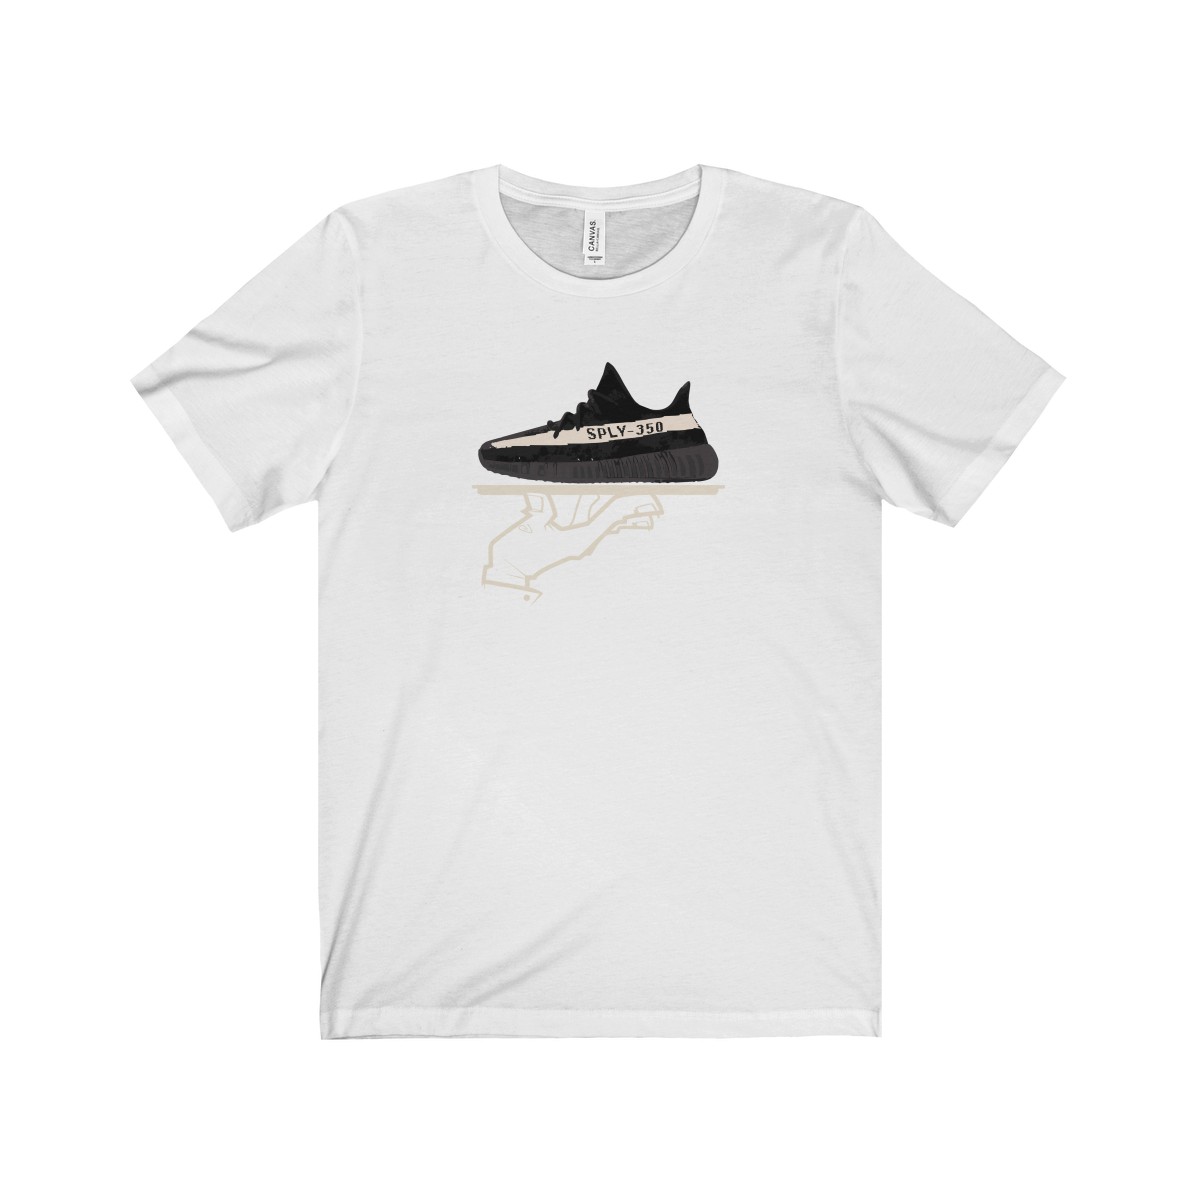 Now Serving Deluxe Yeezy Boost 350 V2 Black/White T-Shirt